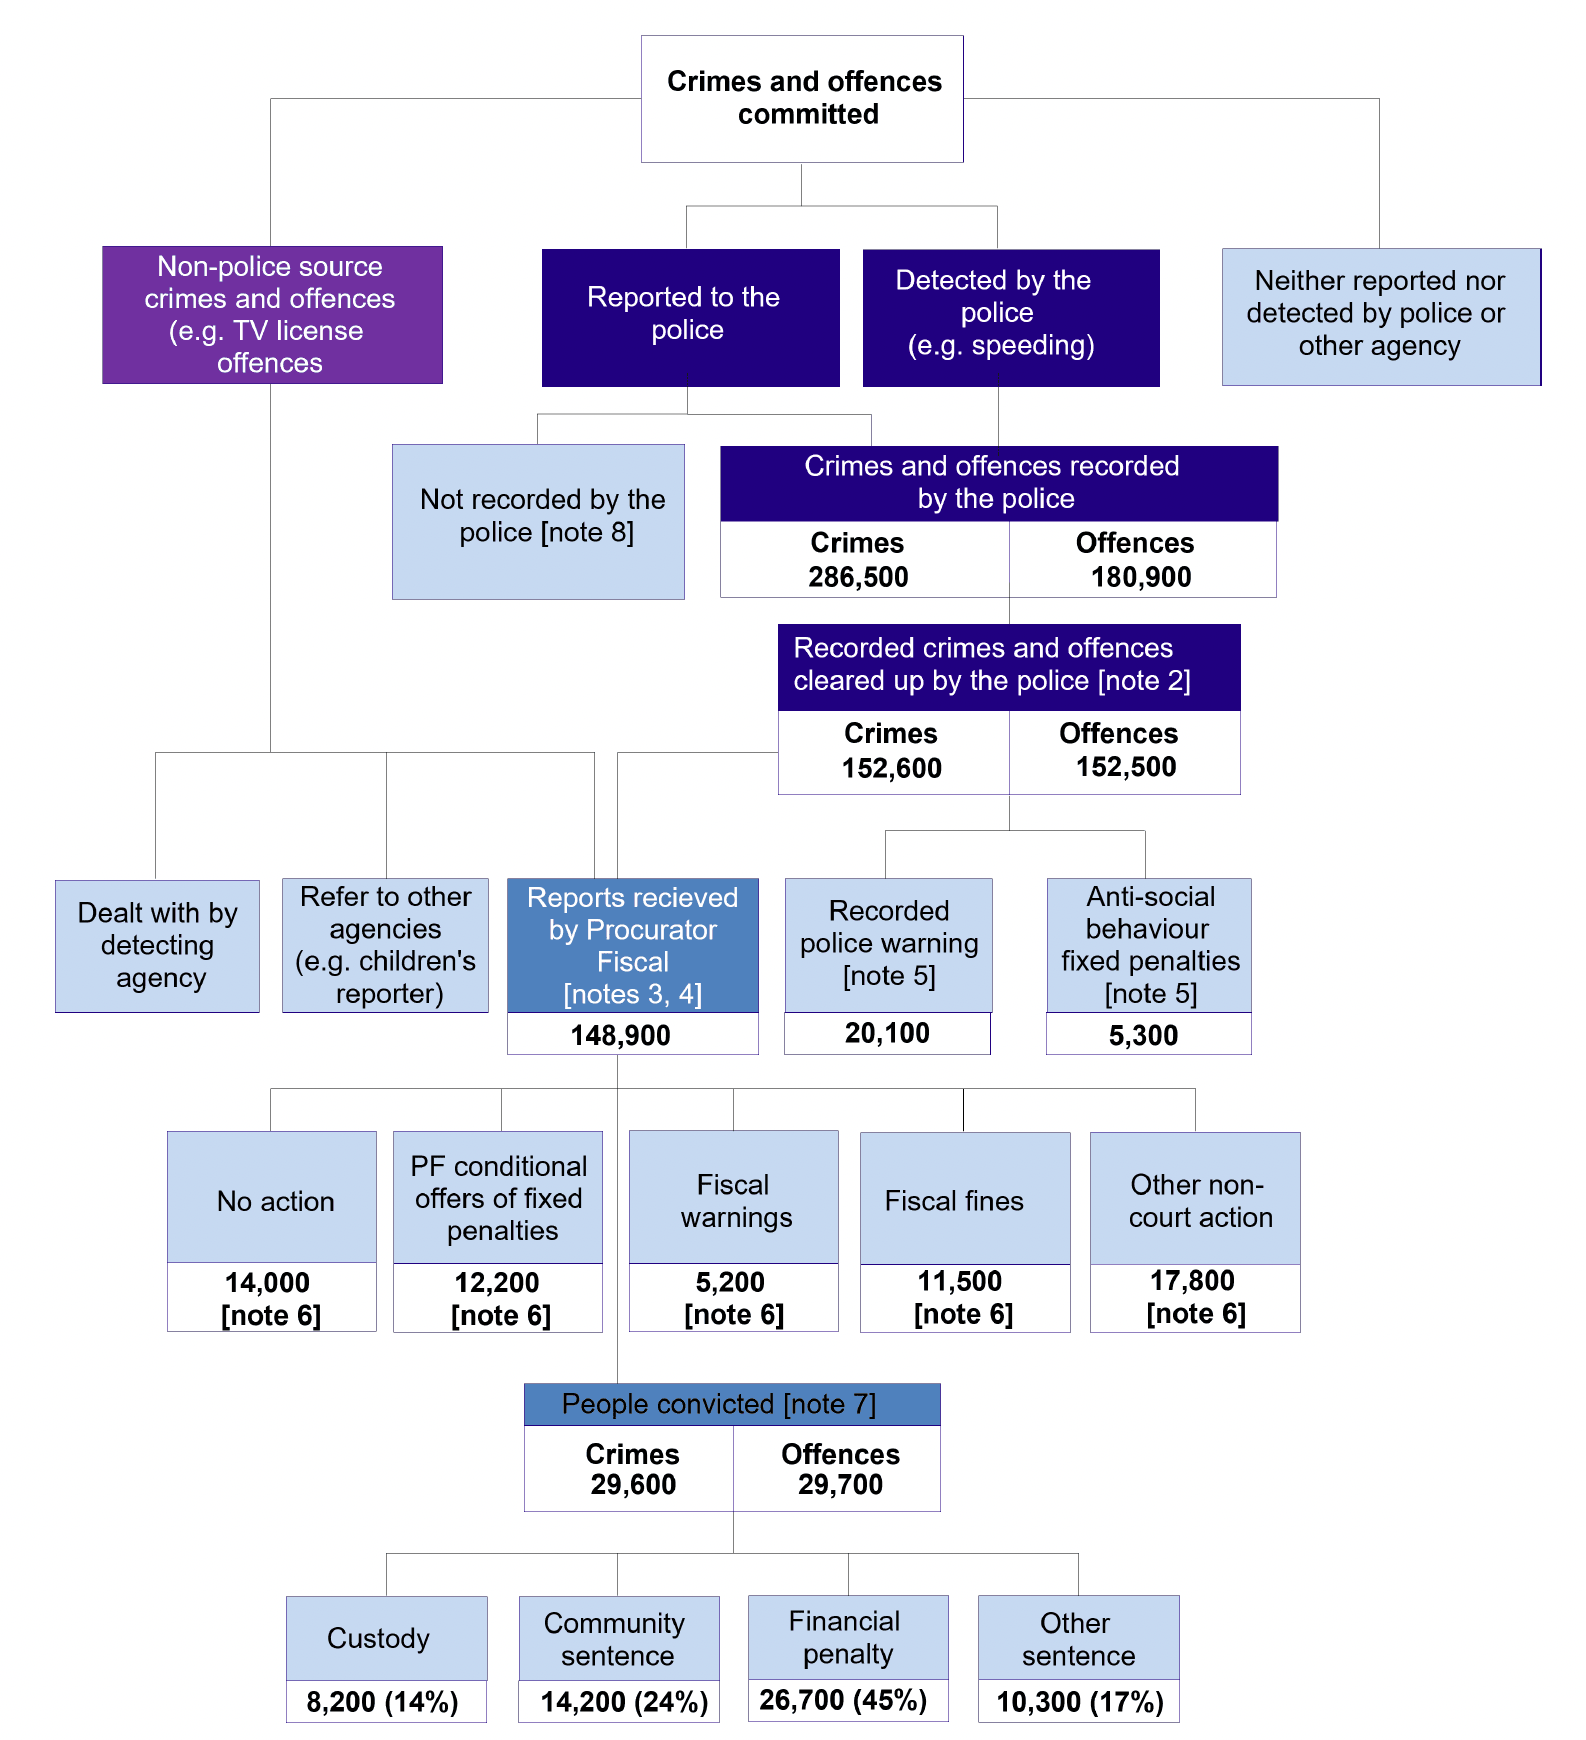 Detailed flow chart providing an overview of actions taken within the criminal justice system from the point a crime or offence is committed, with notes underneath. Level 1 is one box: all crimes and offences committed. Level 2 shows how it is reported and is split into 4 boxes: Non-police source crimes and offences, reported to the police, detected by the police, and neither reported or detected by police or other agency. Level 3 shows how it is recorded and is split into 2 boxes: crimes (286,500) and offences (180,900) recorded by the police come from a crime or offence being reported or detected by the police. The other box is where it is not recorded by the police (see note 8). Level 4 shows if the crime (152,600) or offence (152,500) has been cleared up by the police (see note 2). Level 5 shows next steps from it being cleared up, with 5,300 Anti-social behaviour fixed penalties (note 5), 20,100 Recorded police warnings (note 5) and 148,900 Reports received by Procurator Fiscal (notes 3, 4). Non-police source crimes and offences from level 2 can also lead to a report received by Procurator Fiscal, or is Dealt with by detecting agency, or is referred to other agencies. Level 6: of the 148,900 reports, there were 14,000 “no action”, 12,200 PF conditional offence of fixed penalties, 5,200 fiscal warnings, 11,500 fiscal fines and 17,800 other non-court action (note 6). Level 7: there were also people convicted for crimes (29,600) and offences (29,700). Level 8: of those convicted, there were 8,200 custodial sentences (14%), 14,200 community sentences (24%), 26,700 financial penalties (45%) and 10,300 other sentences (17%).